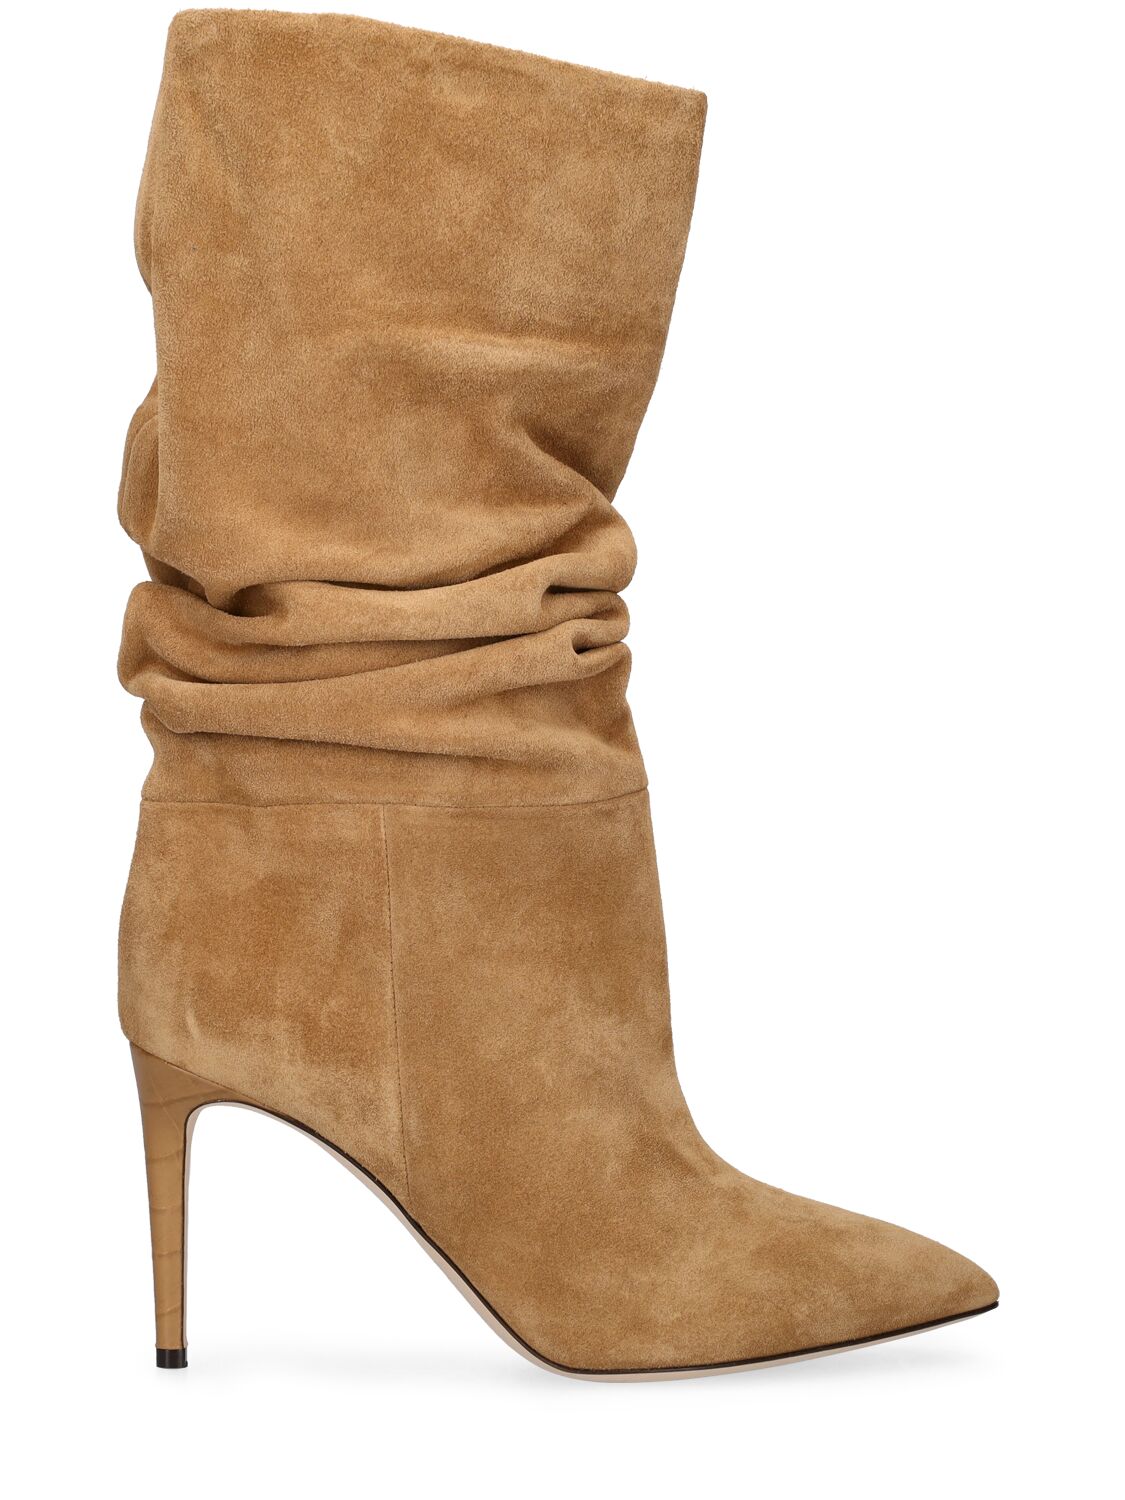 Paris Texas 85mm Slouchy Suede Boots In Camel